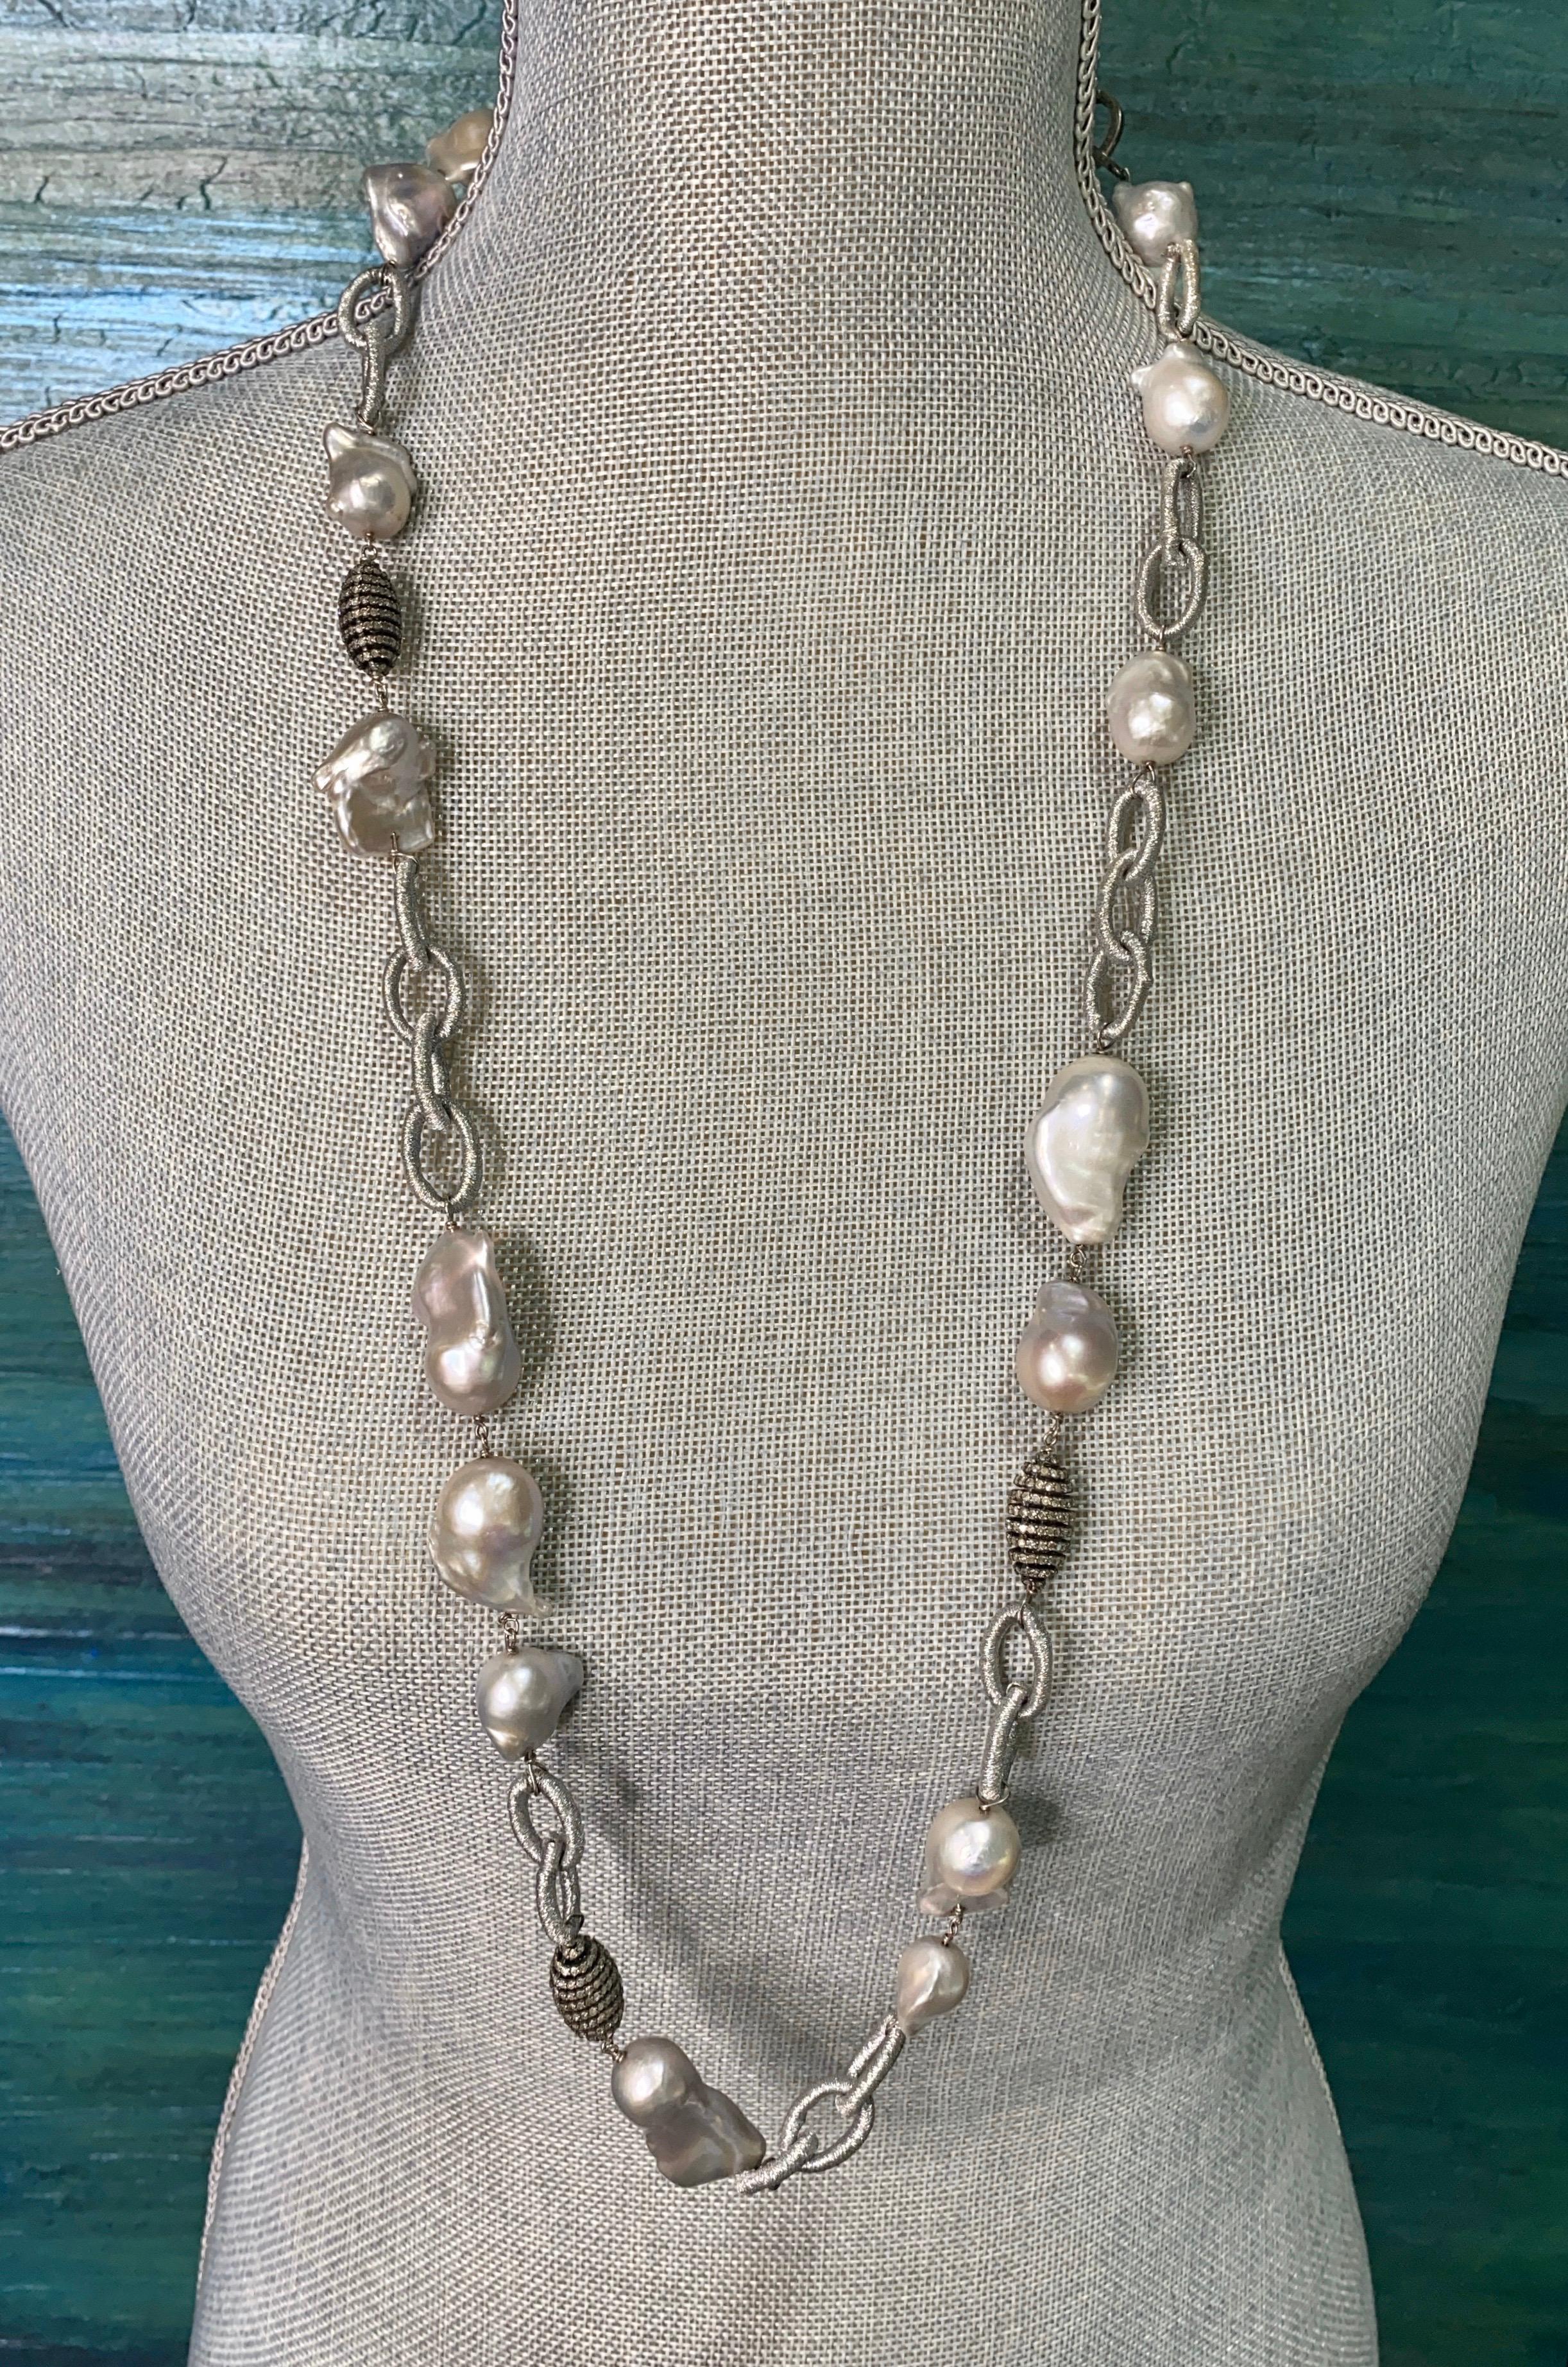 This necklace is an artful combination of silvery platinum, naturally colored baroque Edison pearls hand-wired onto glistening silver lurex links and sparkling diamond beads!  The pearls are 14 - 18 mm with a few whoppers (30mm long) and beautiful